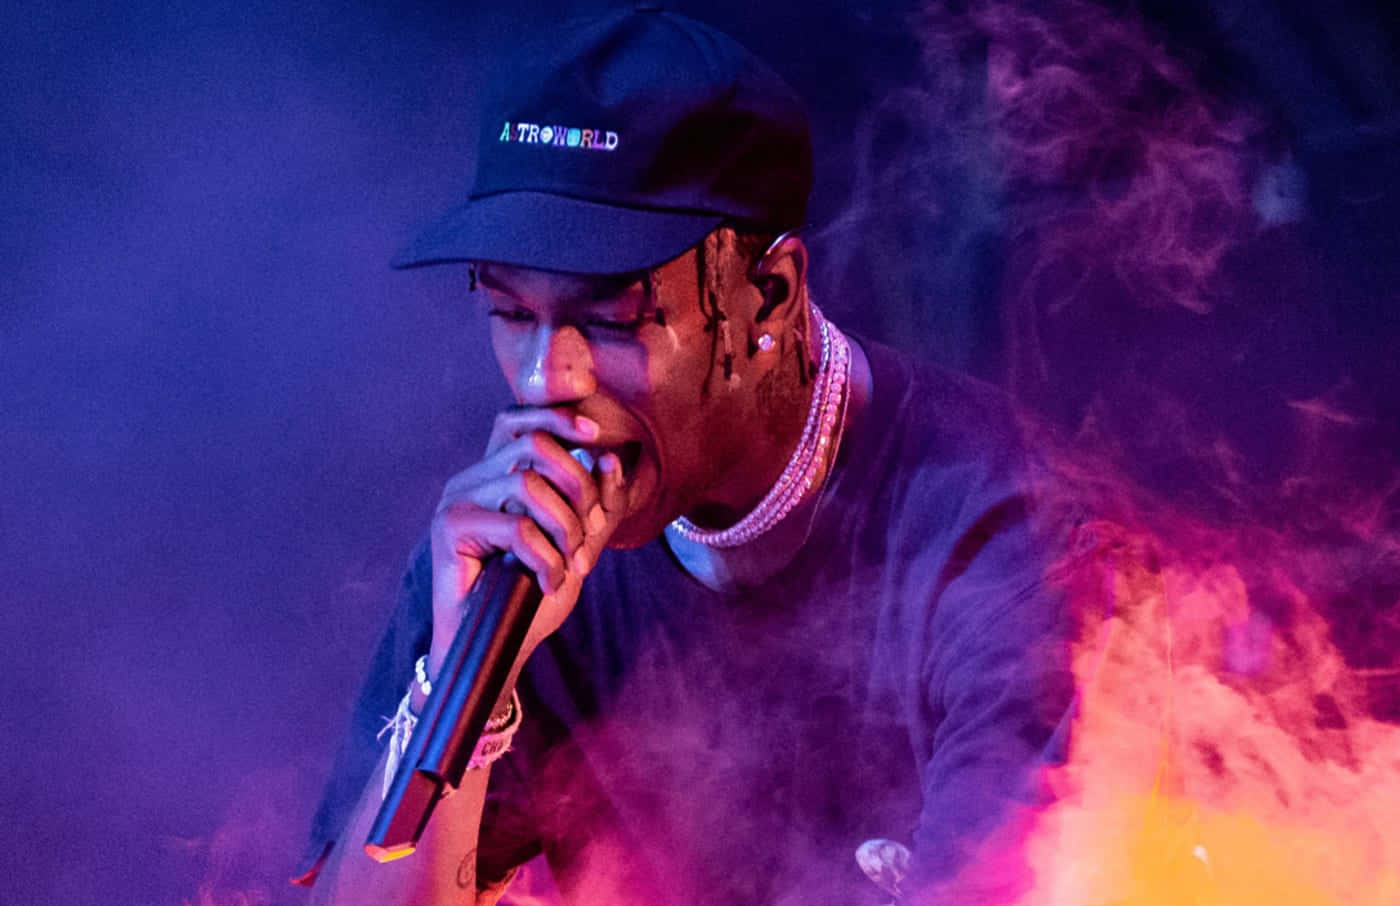 Musical innovator Travis Scott bringing his electric sound to the stage.